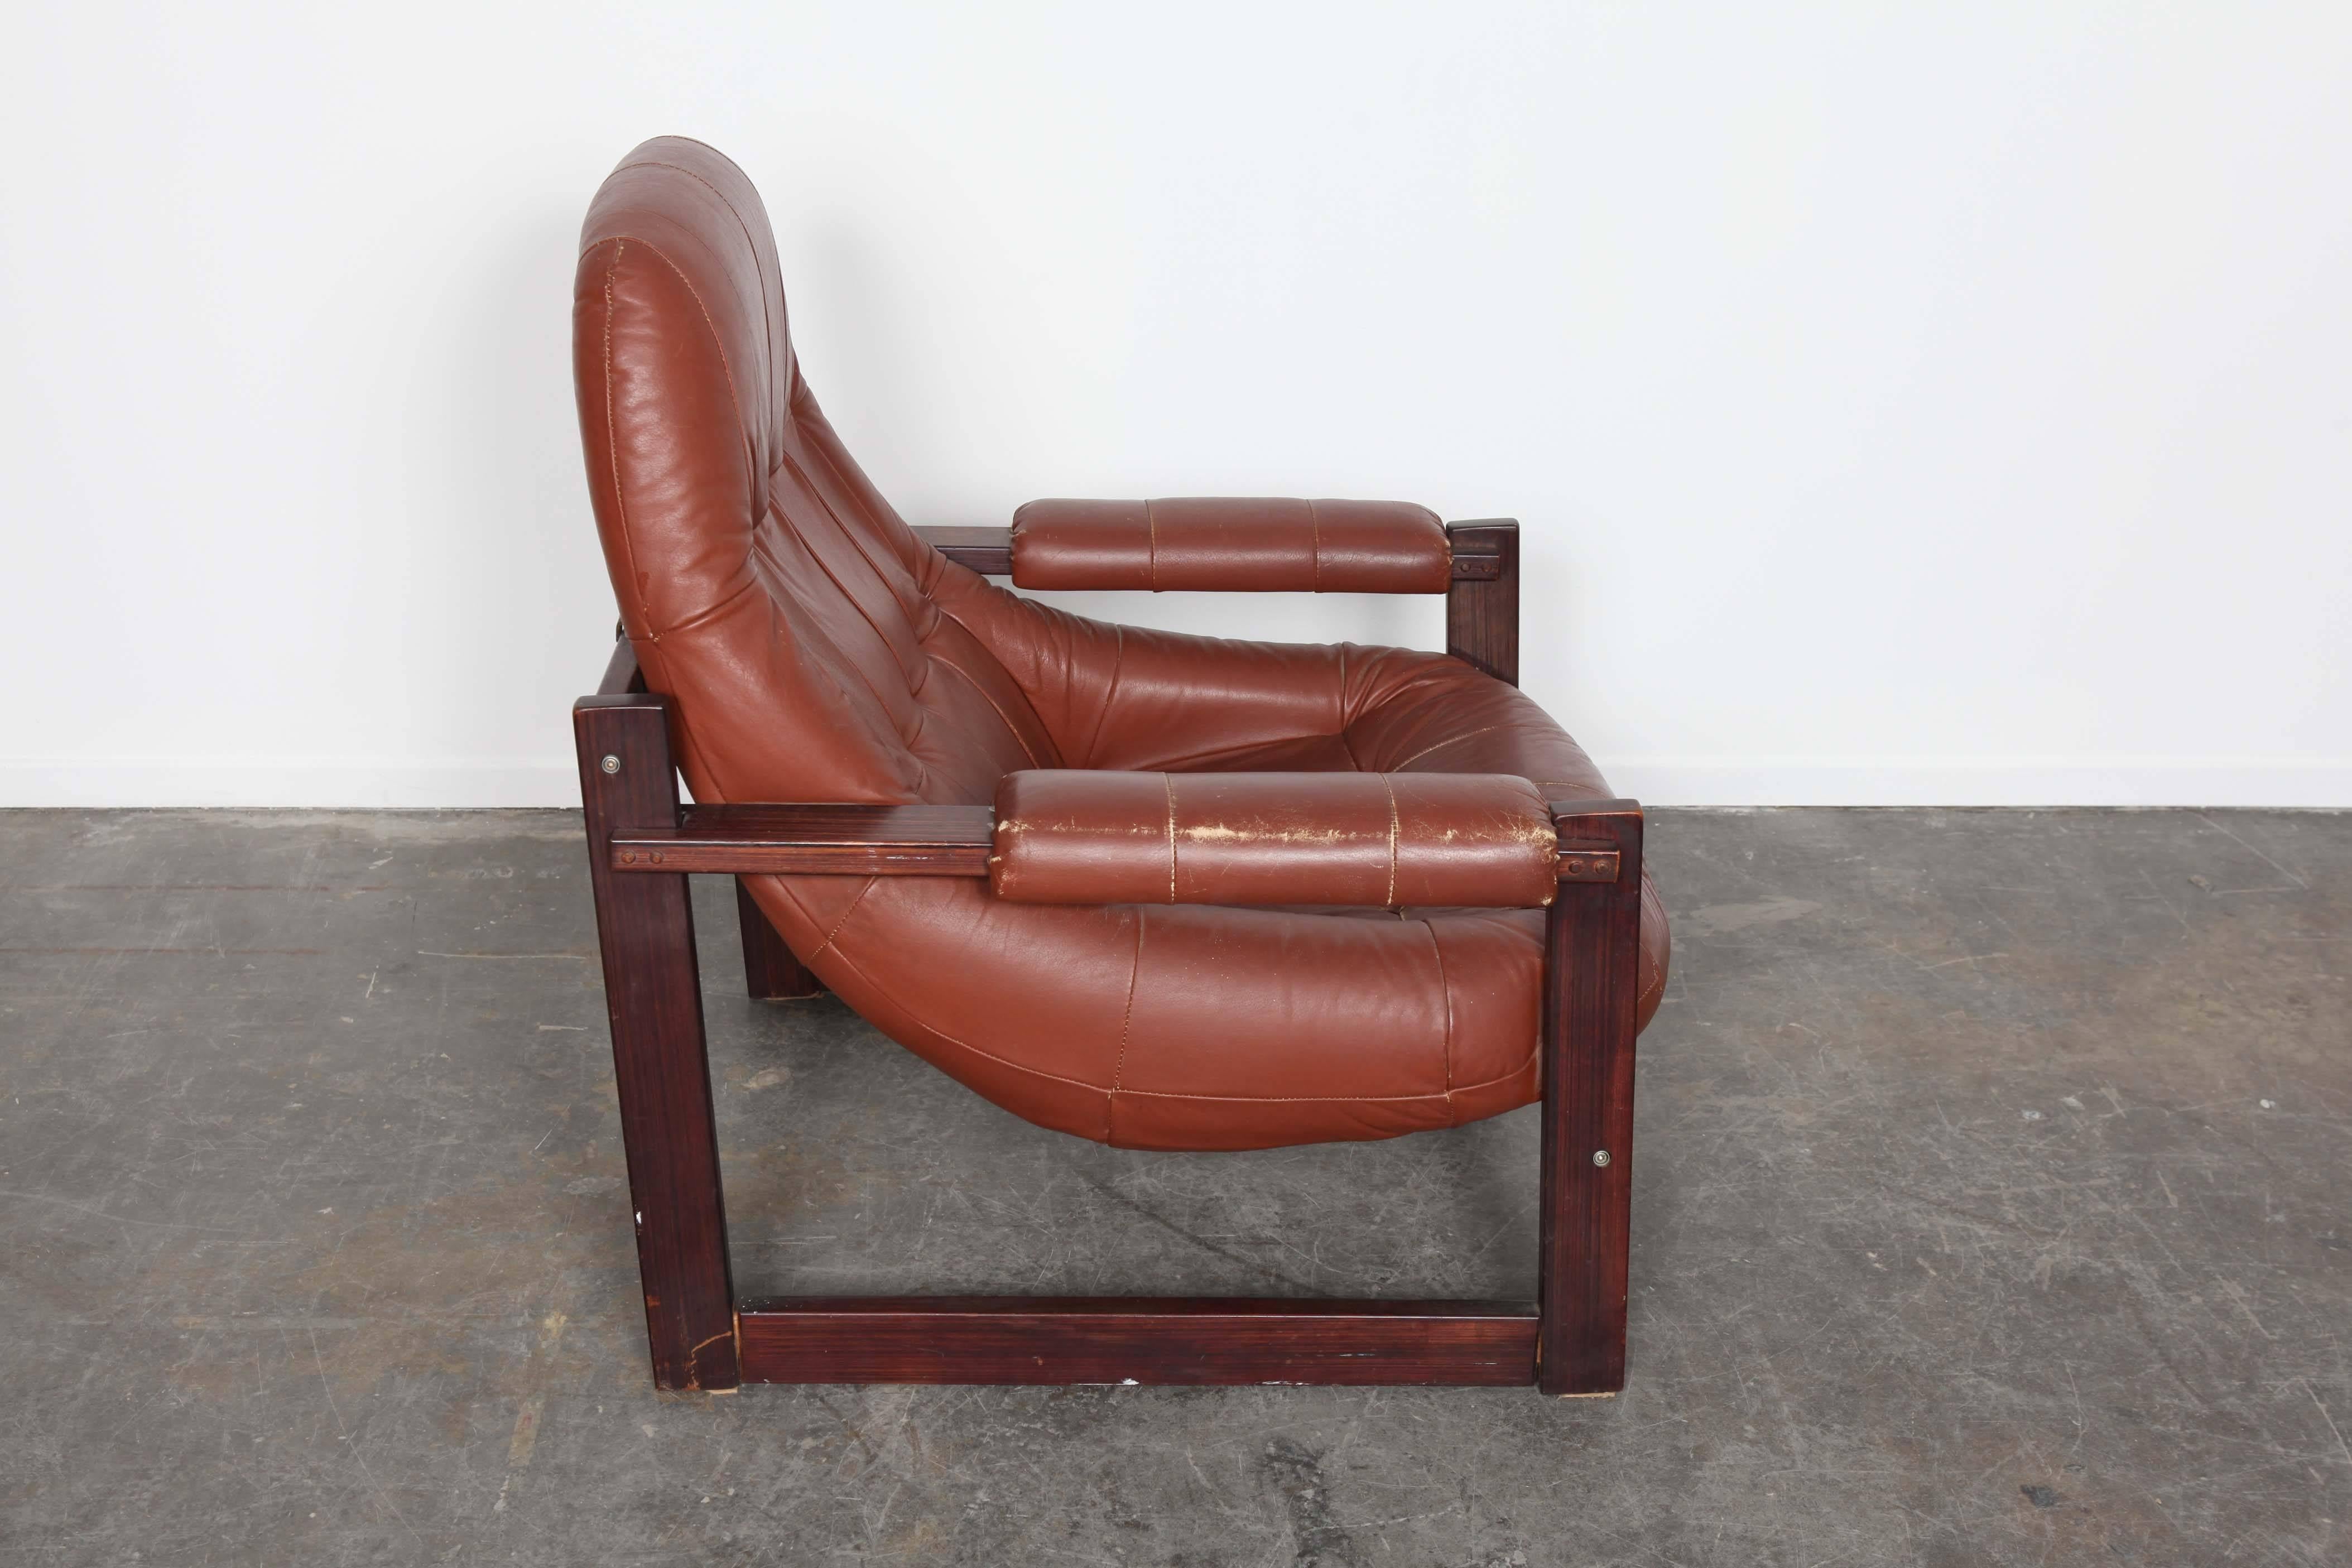 Percival Lafer MP-167 Brazilian Lounge Chair In Original Brown Leather In Good Condition For Sale In North Hollywood, CA